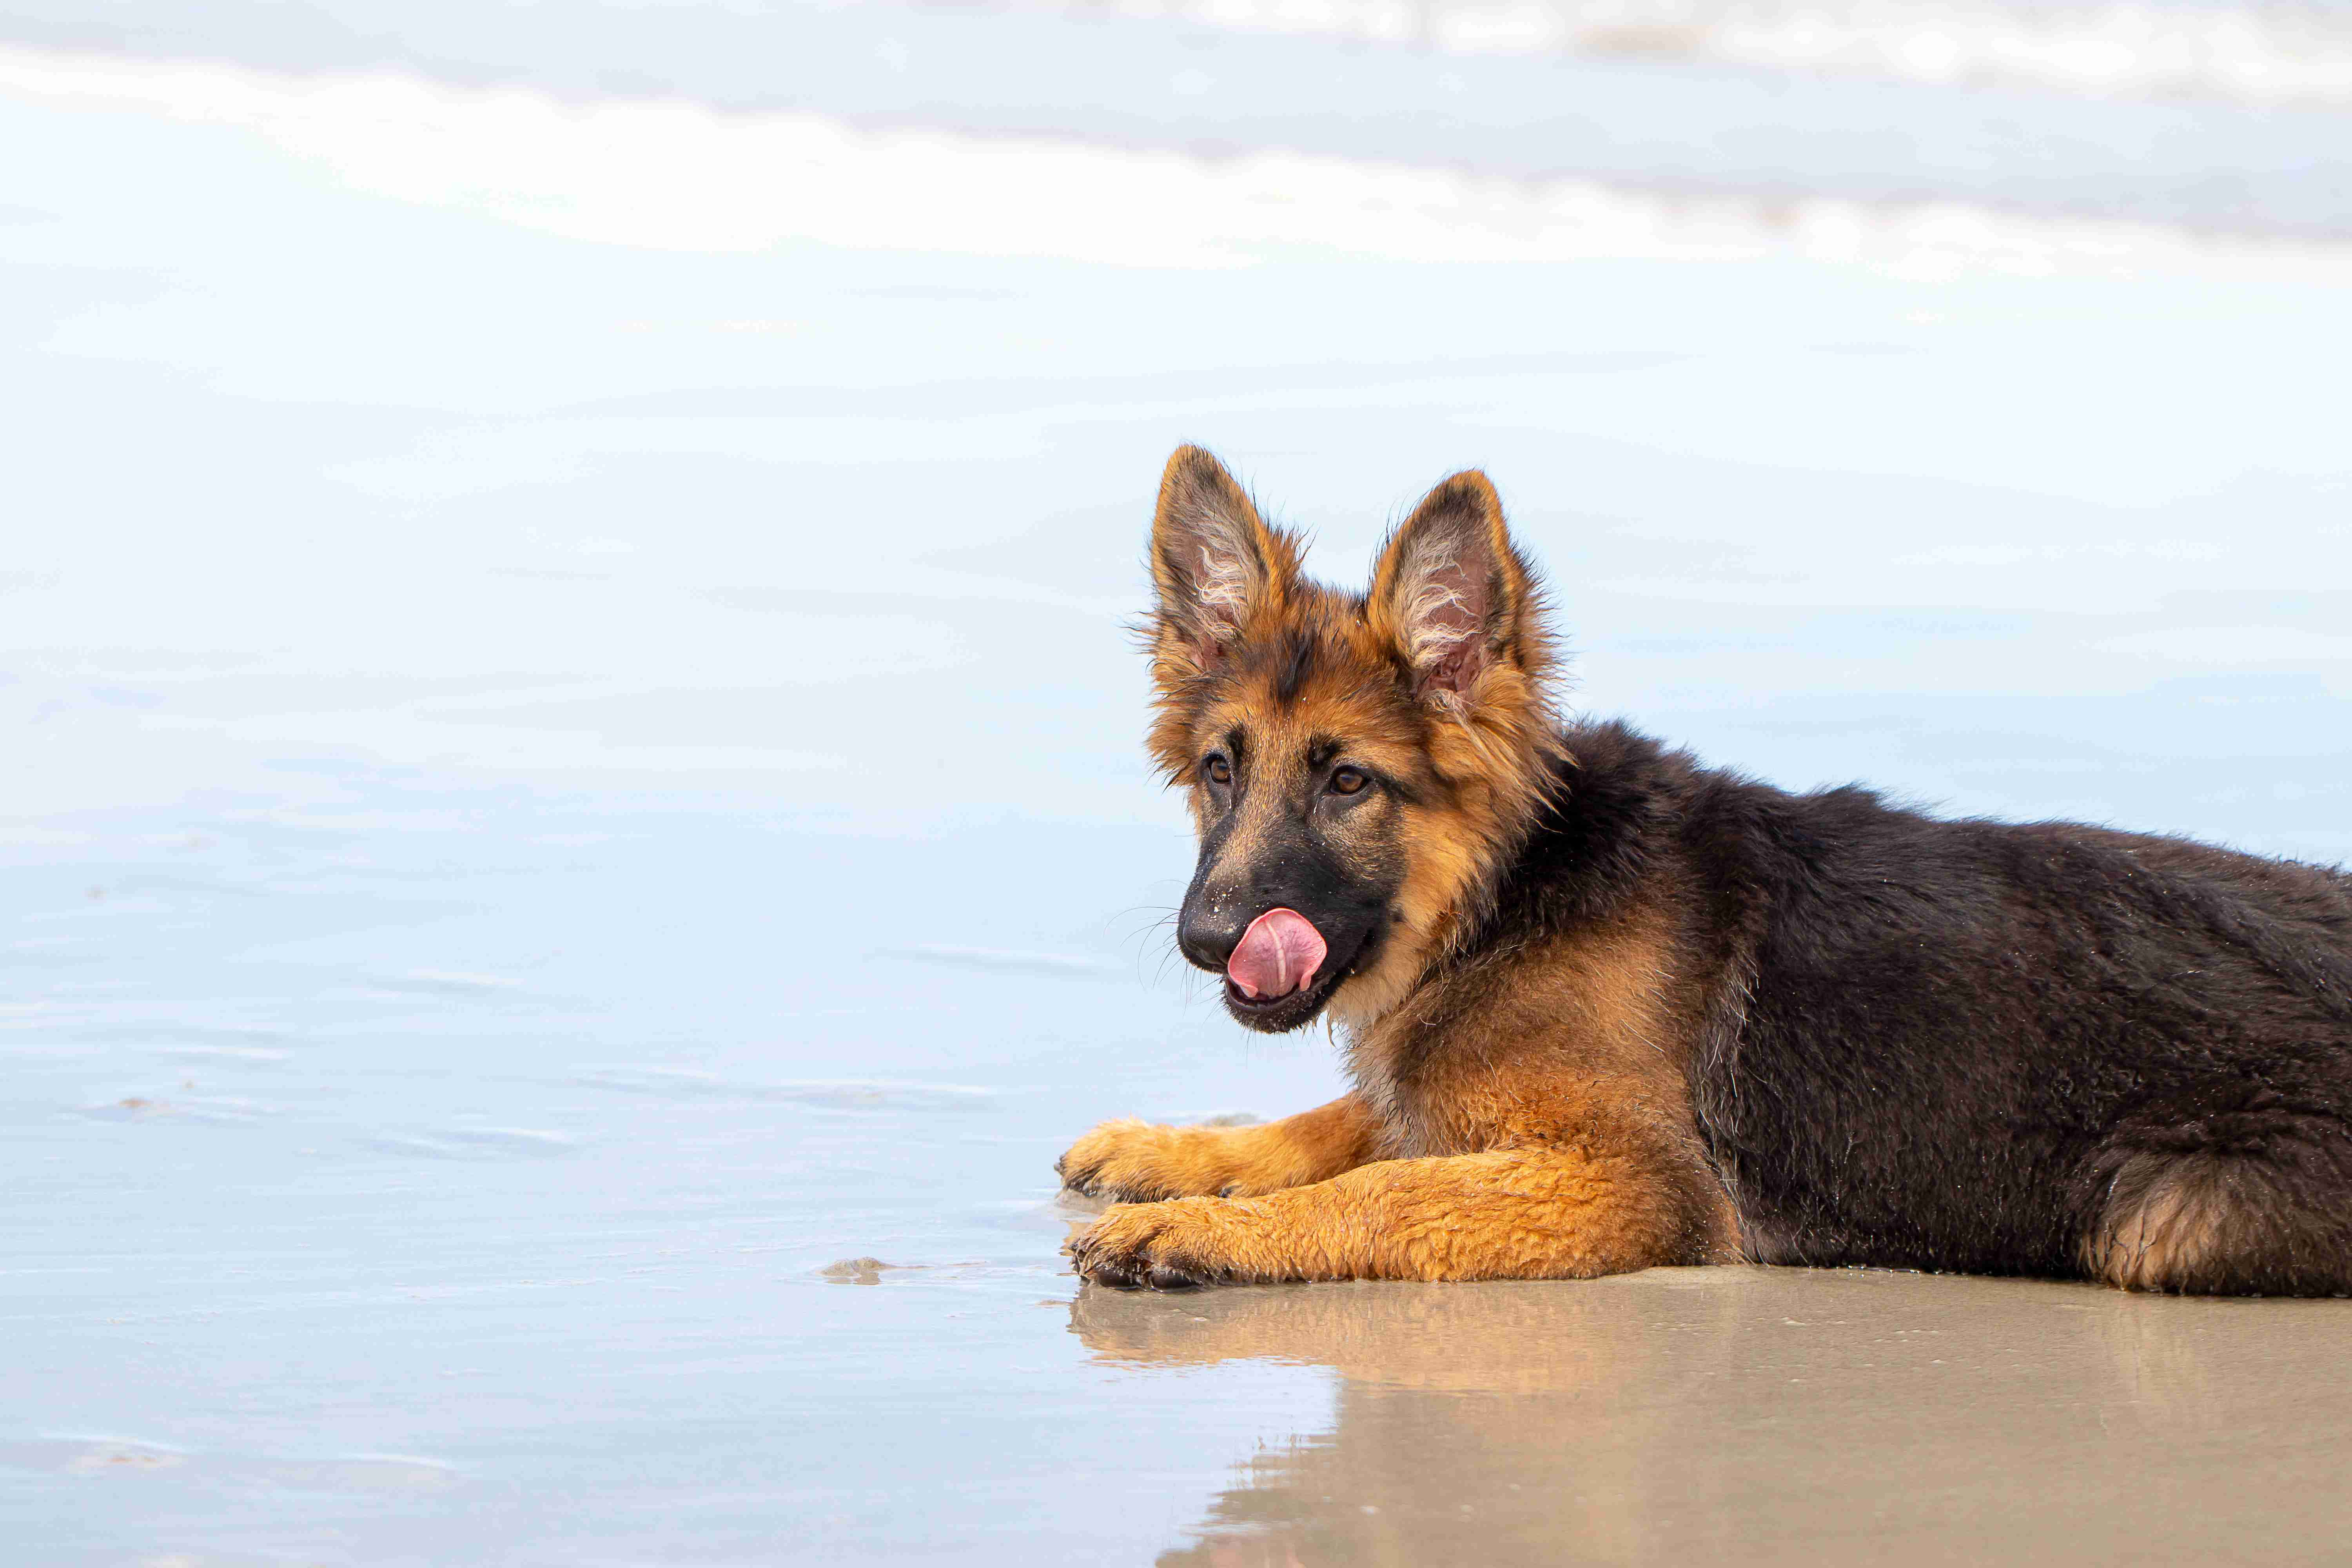 What are some common health issues that German Shepherd puppies can experience in the first two weeks?